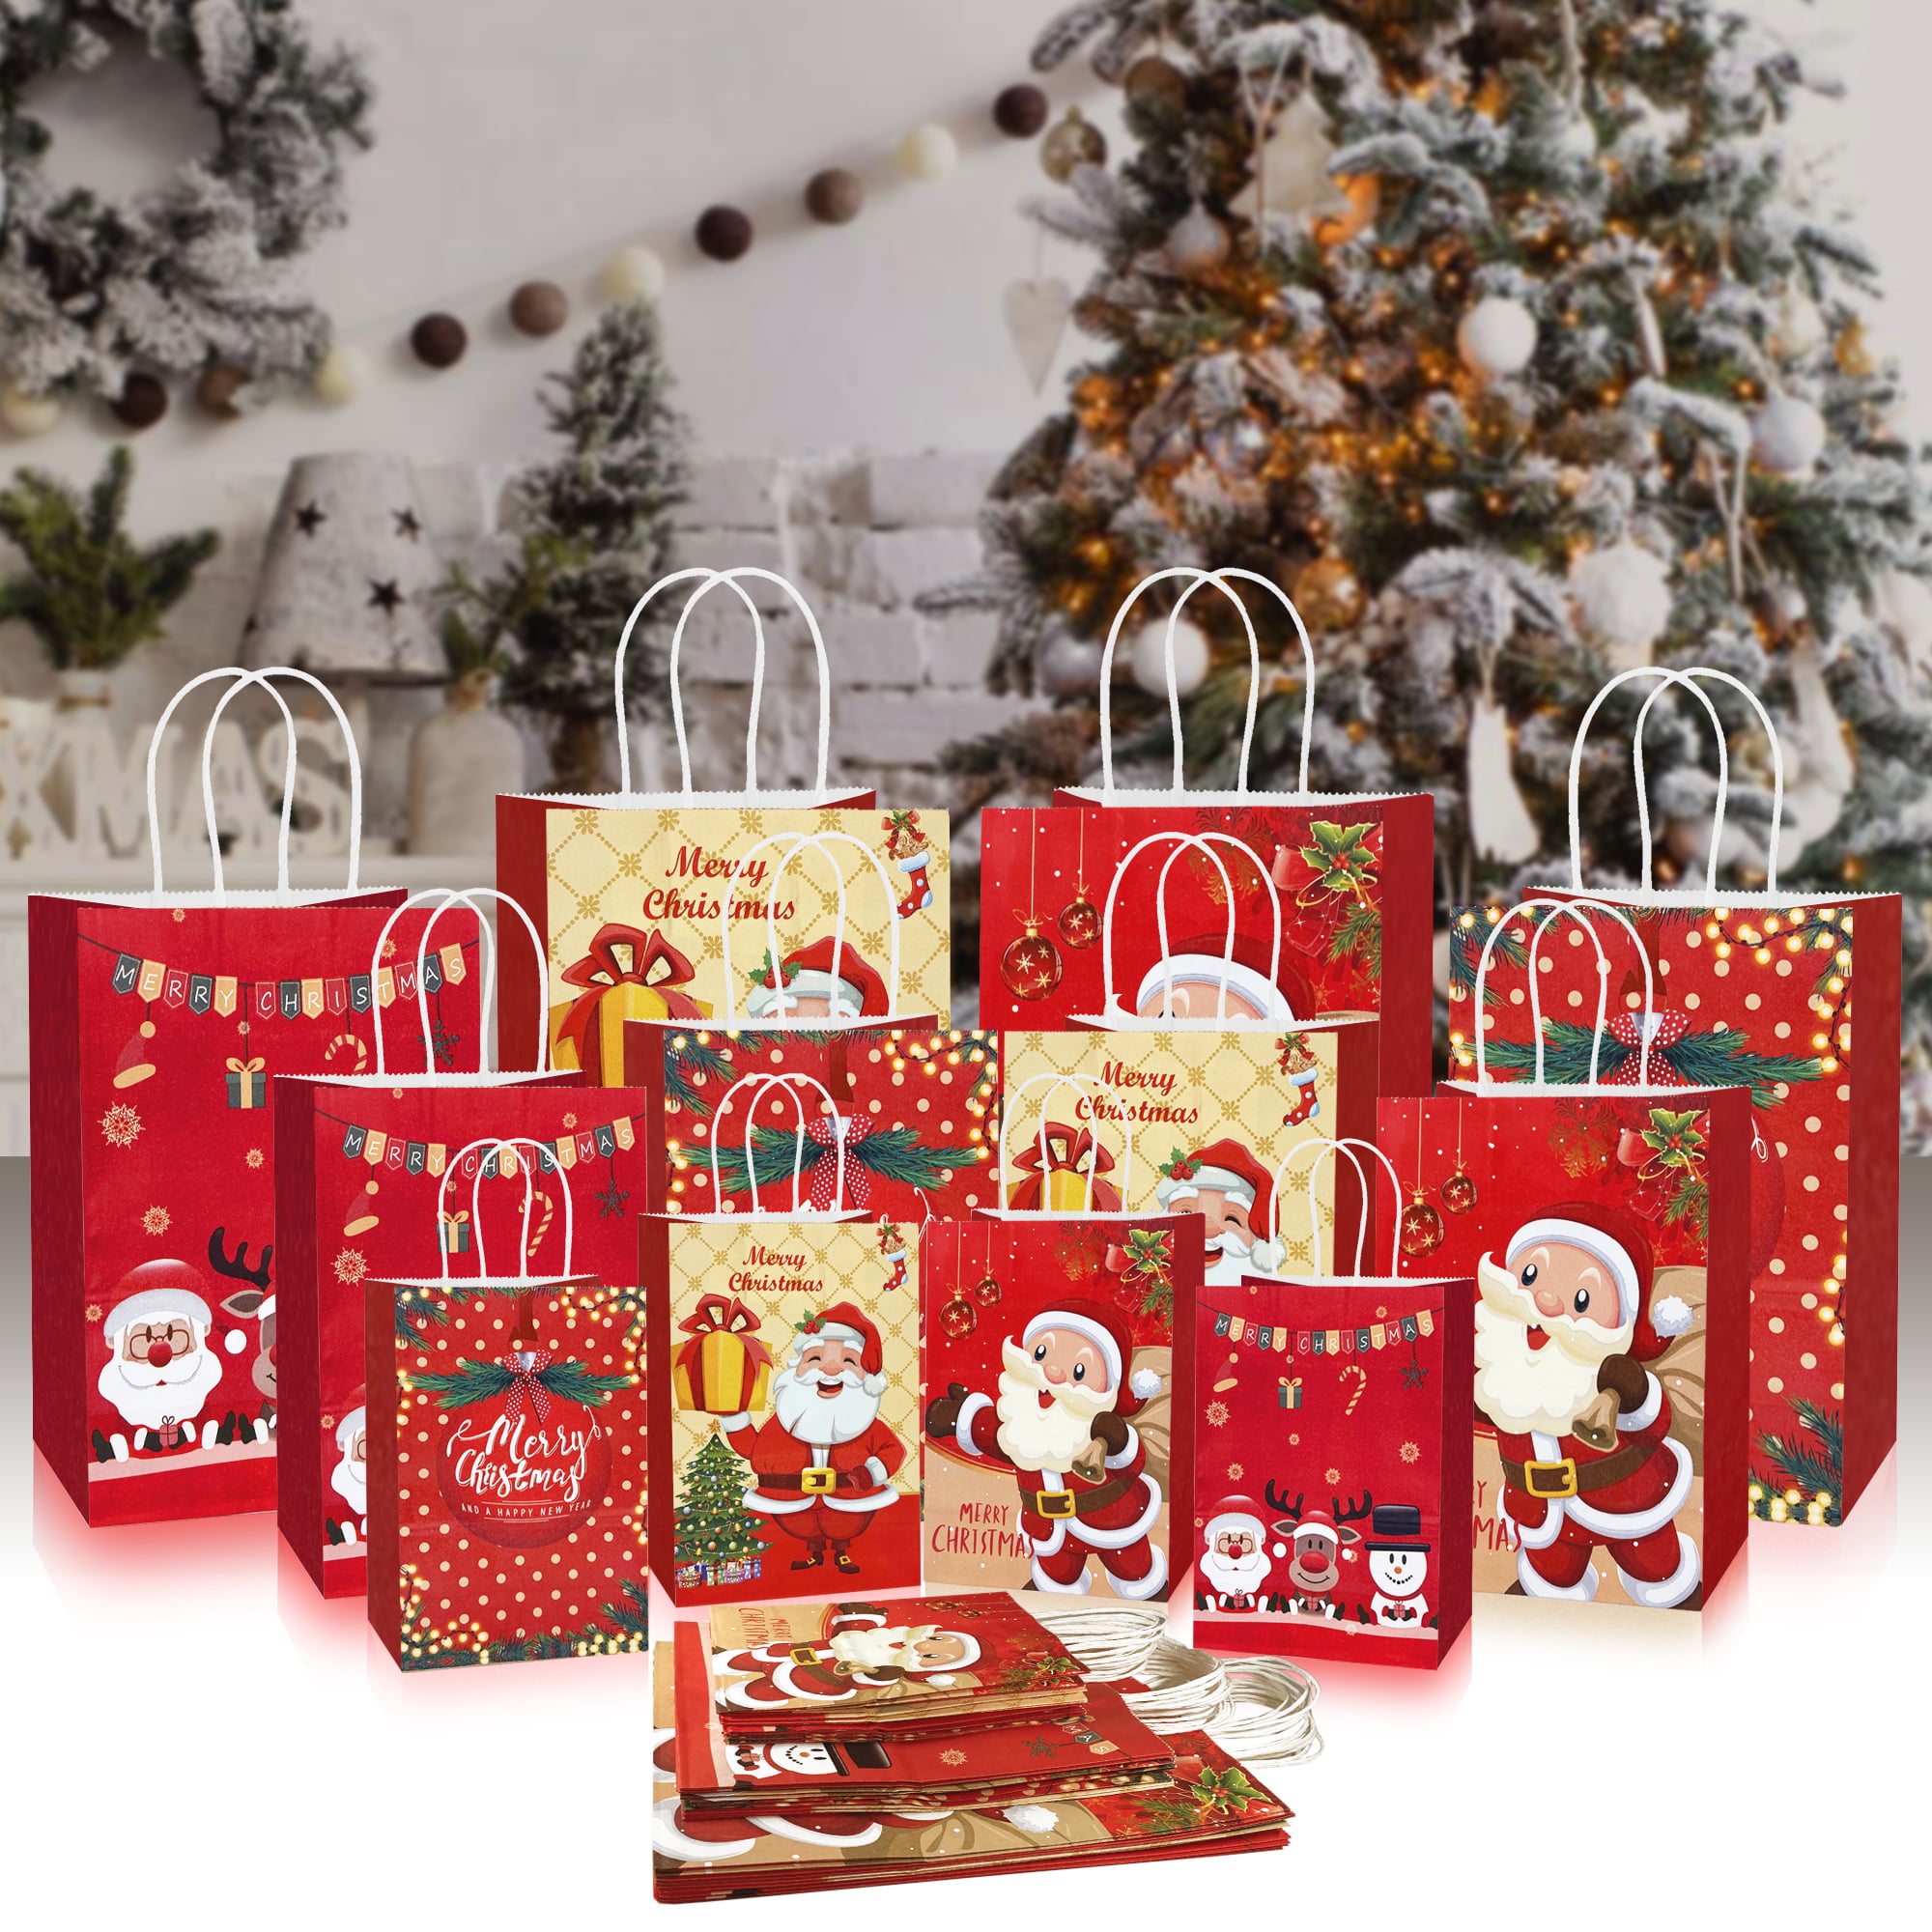 4 x Assorted Christmas Tree Style Gift Bags Set Xmas Party Gift Cord Handles NEW 